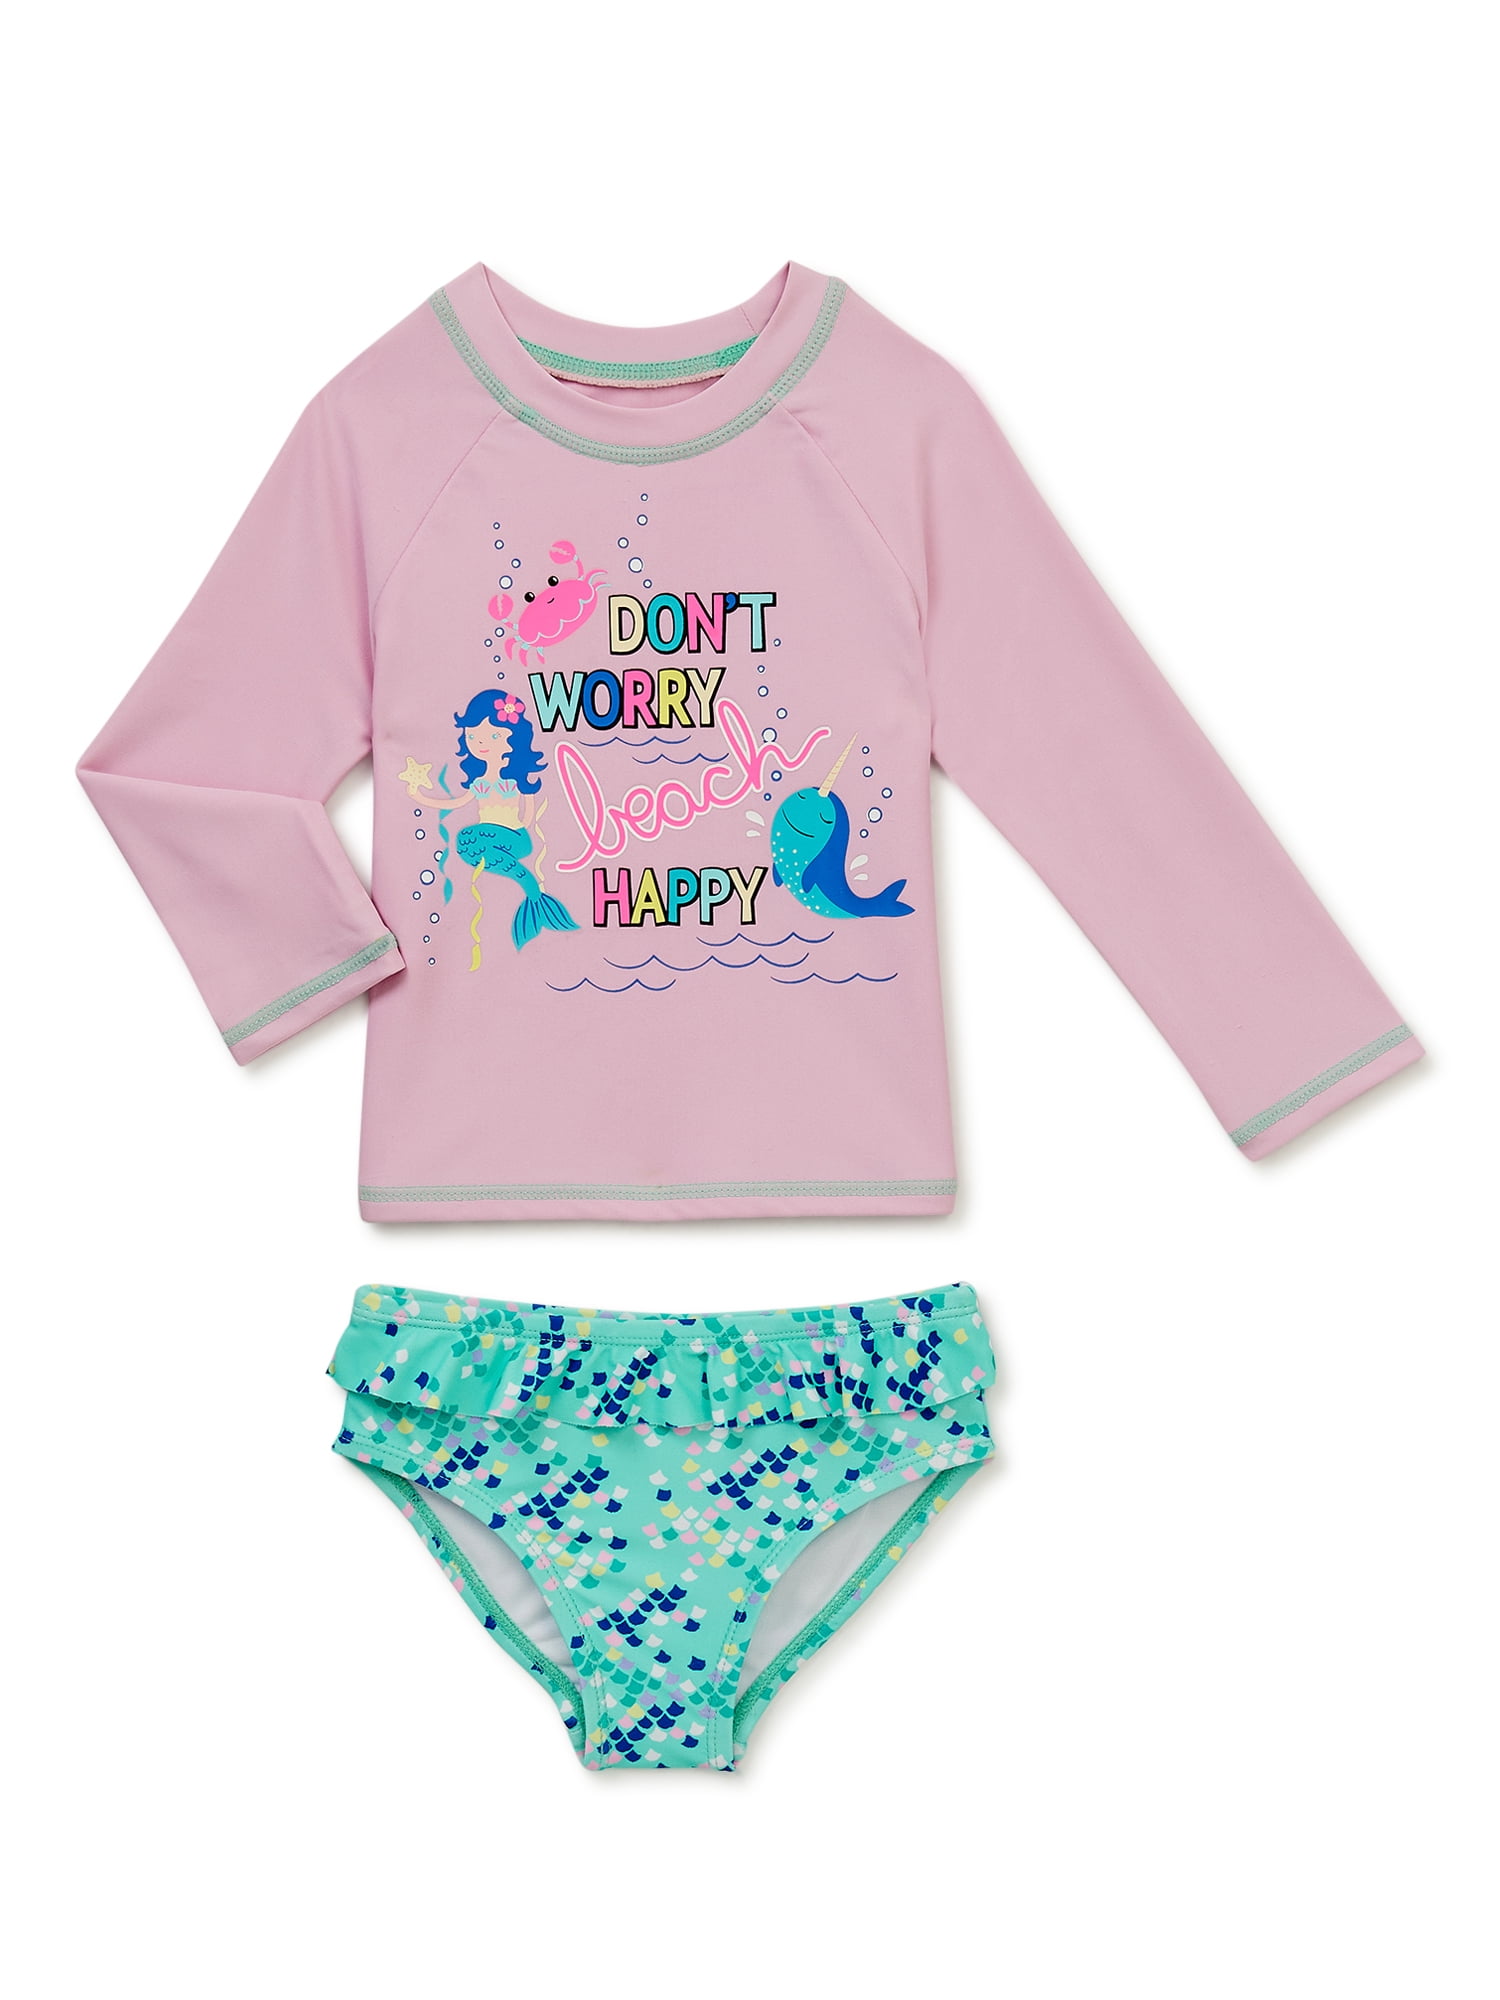 Essentials Toddler and Baby Girls' UPF 50 2-Piece Long-Sleeve Rash Guard Set 